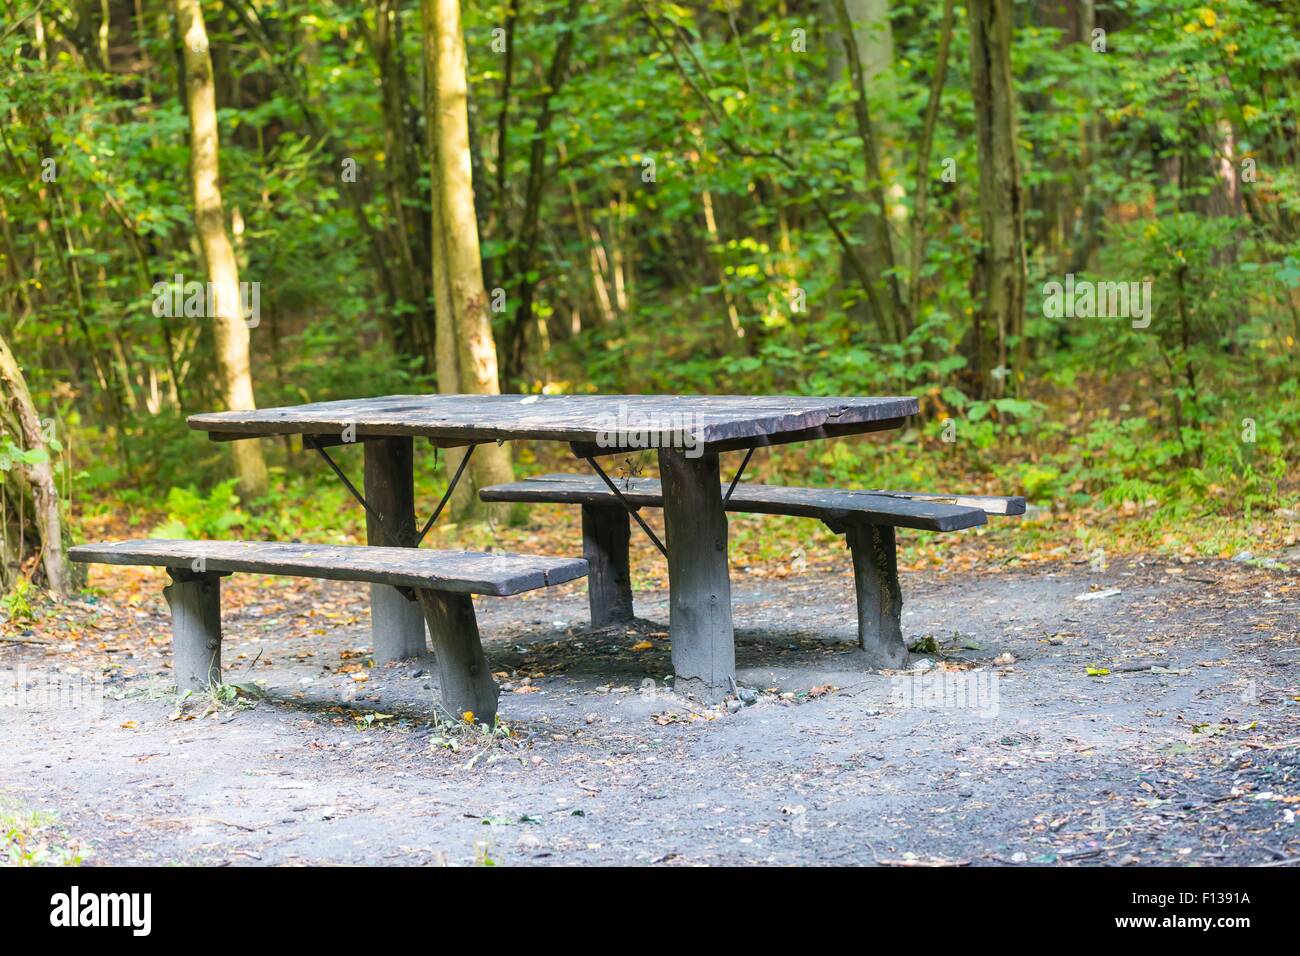 Bench and table in forest. Place for resting for tourists. Natural green forest landscape. Stock Photo